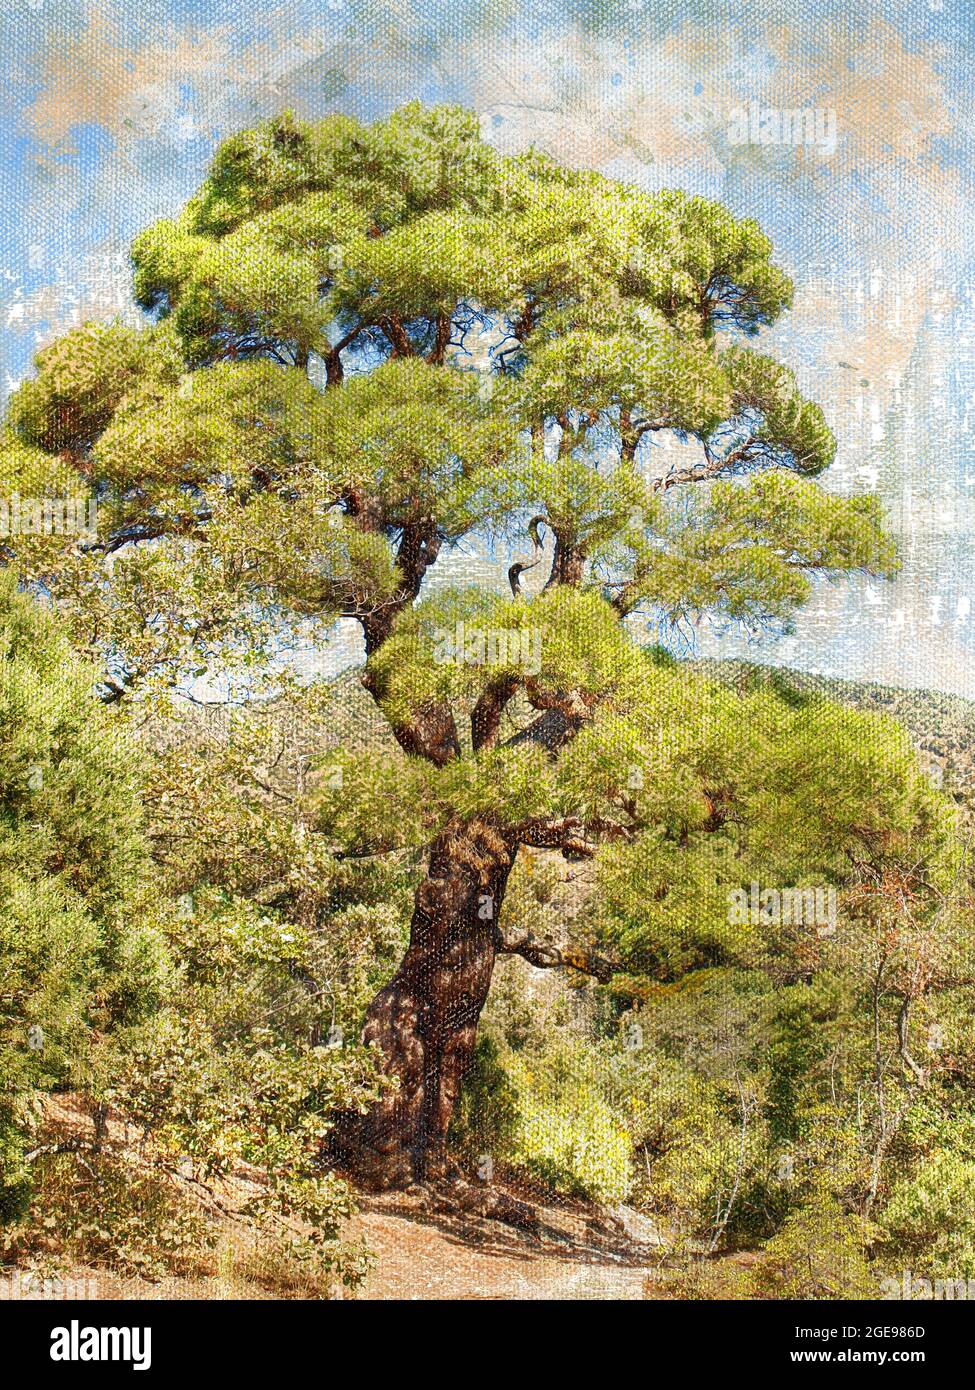 Tall pine tree against the sky and mountains. Pinus brutia. Summer landscape.  Digital watercolor painting. Stock Photo